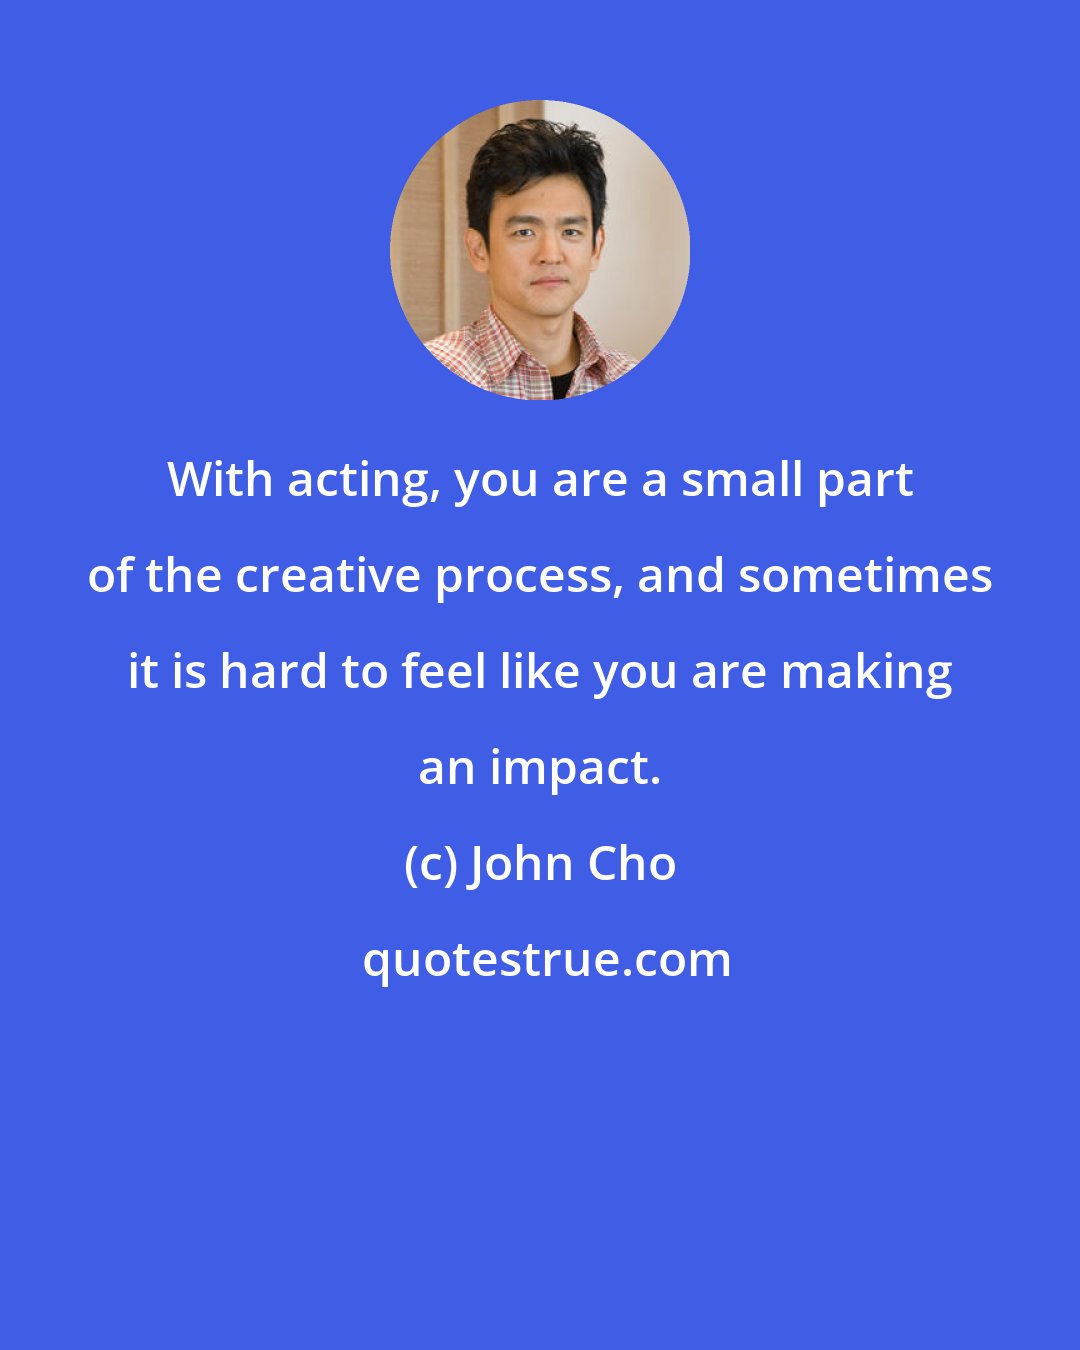 John Cho: With acting, you are a small part of the creative process, and sometimes it is hard to feel like you are making an impact.